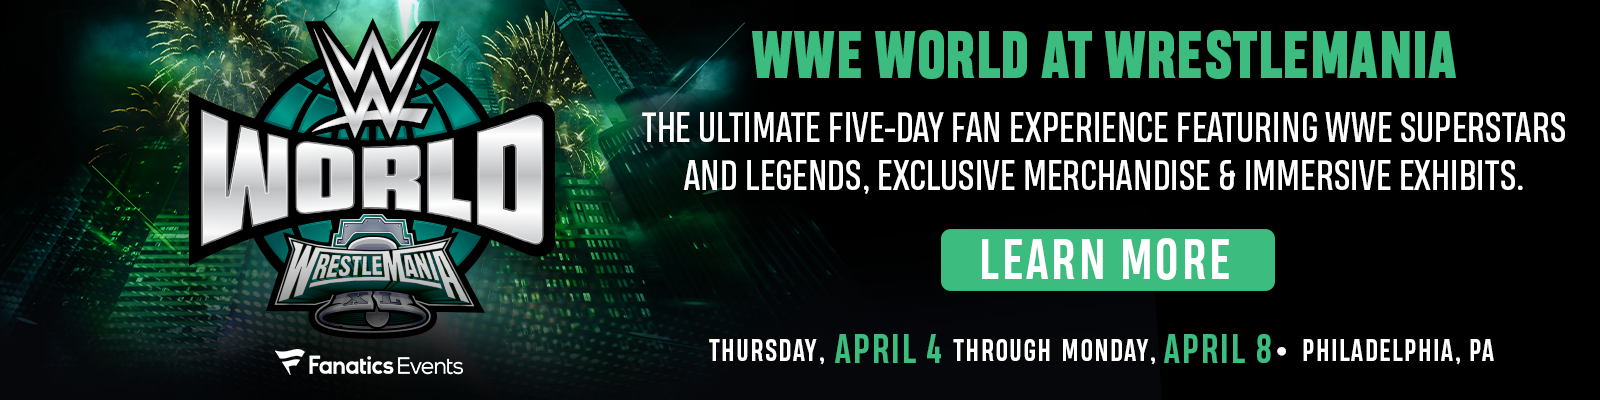 WWE * Elimination Chamber: Perth is almost here! Don't miss all of the action LIVE tomorrow morning only on Peacock! * Original